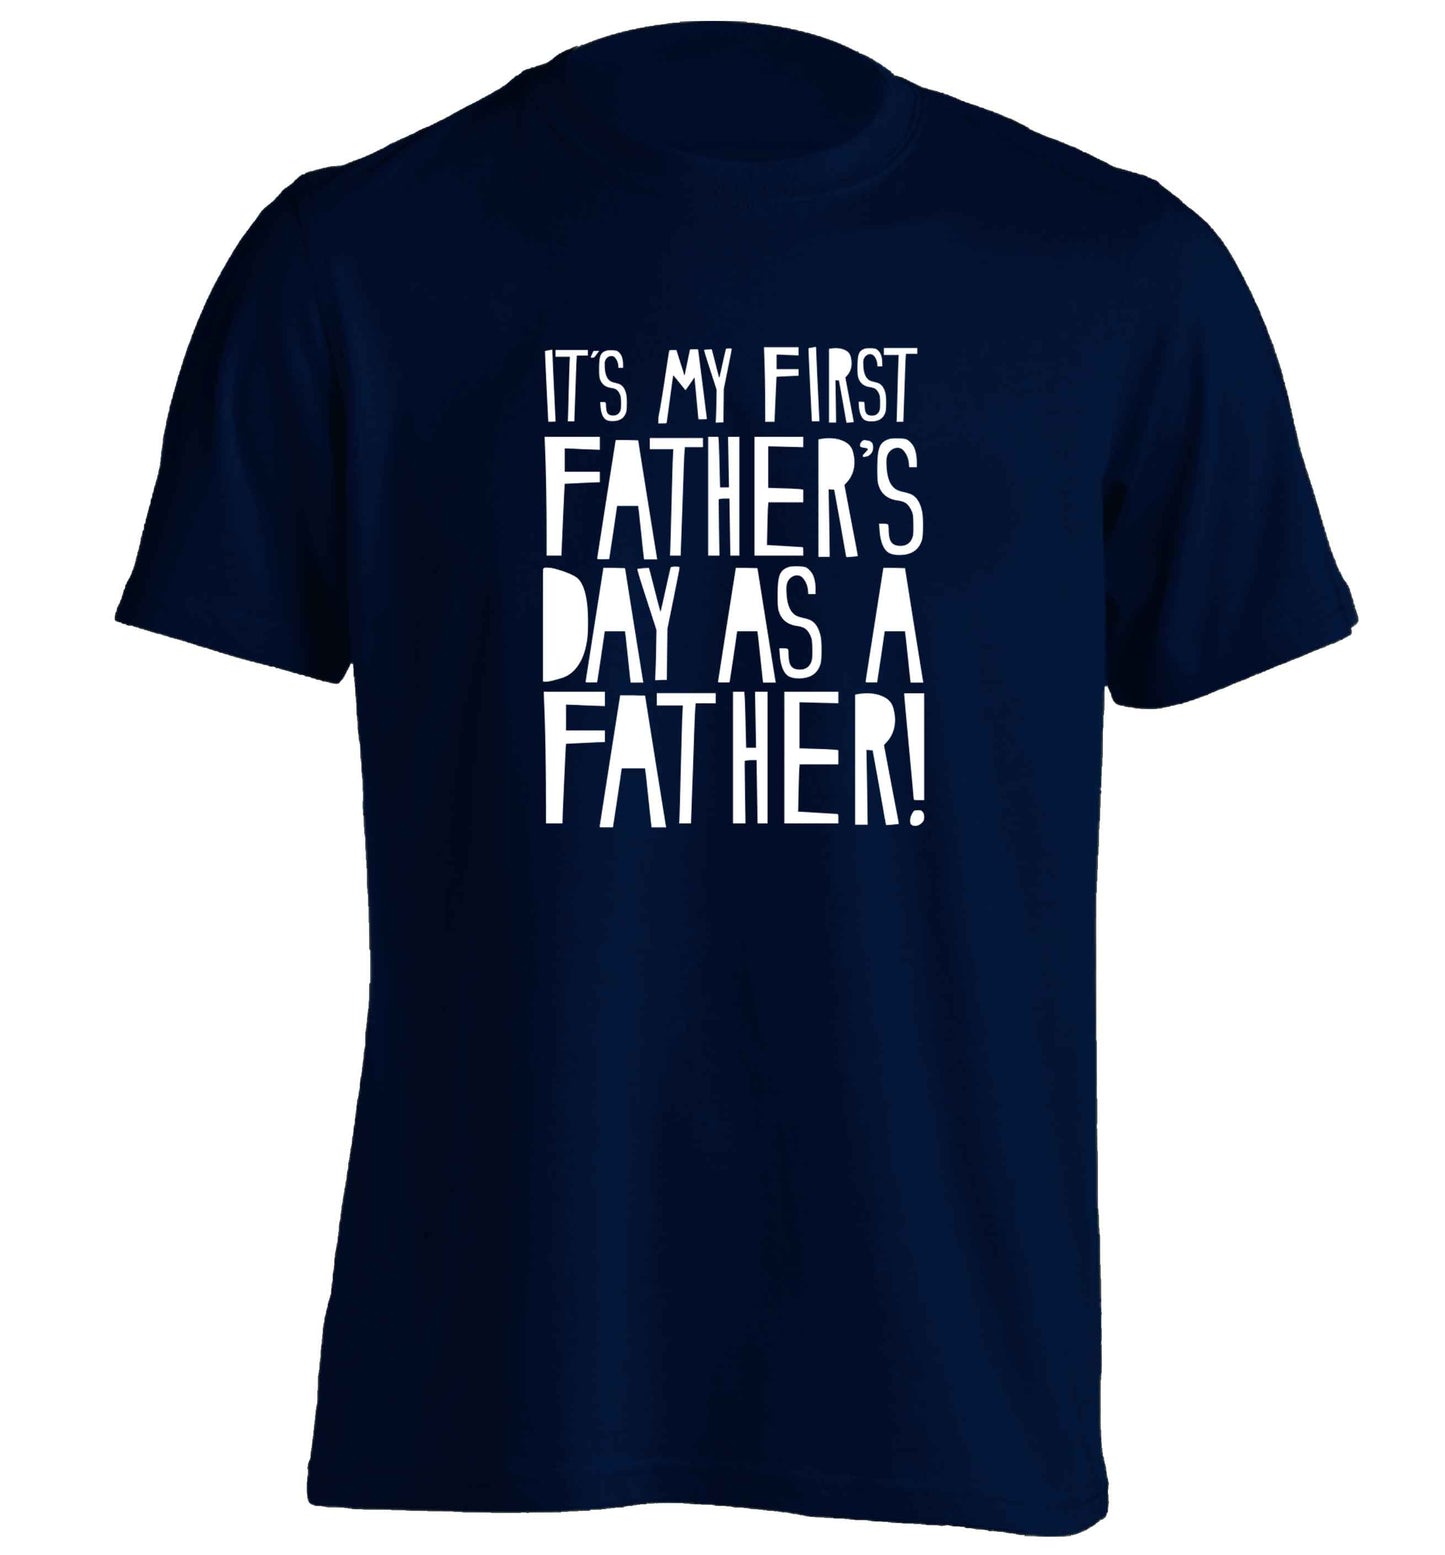 It's my first father's day as a father! adults unisex navy Tshirt 2XL